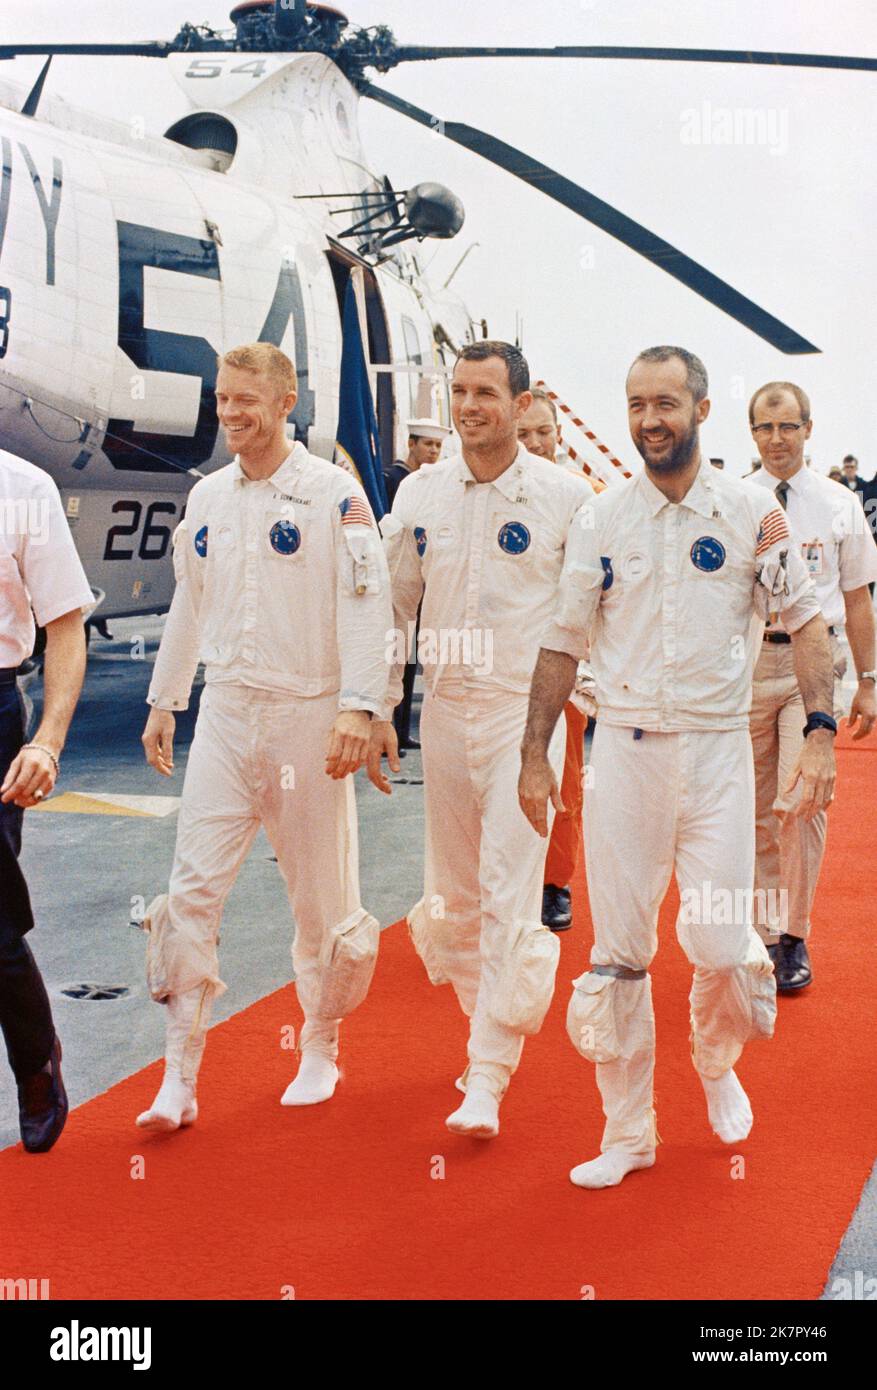 USS Guadalcanal, United States. 18th Oct, 2022. NASA Apollo 9 astronauts, left to right, Russell Schweickart, David Scott, and James McDivitt walk the red carpet after arriving aboard the USS Guadalcanal following Splashdown in the Atlantic Ocean, March 13, 1969 off the coast of Florida. McDivitt commanded the first Gemini spacewalk mission and commanded Apollo 9 during the first crewed orbital flight of a the lunar module, died October 15, 2022 at age 93. Credit: NASA/NASA/Alamy Live News Stock Photo